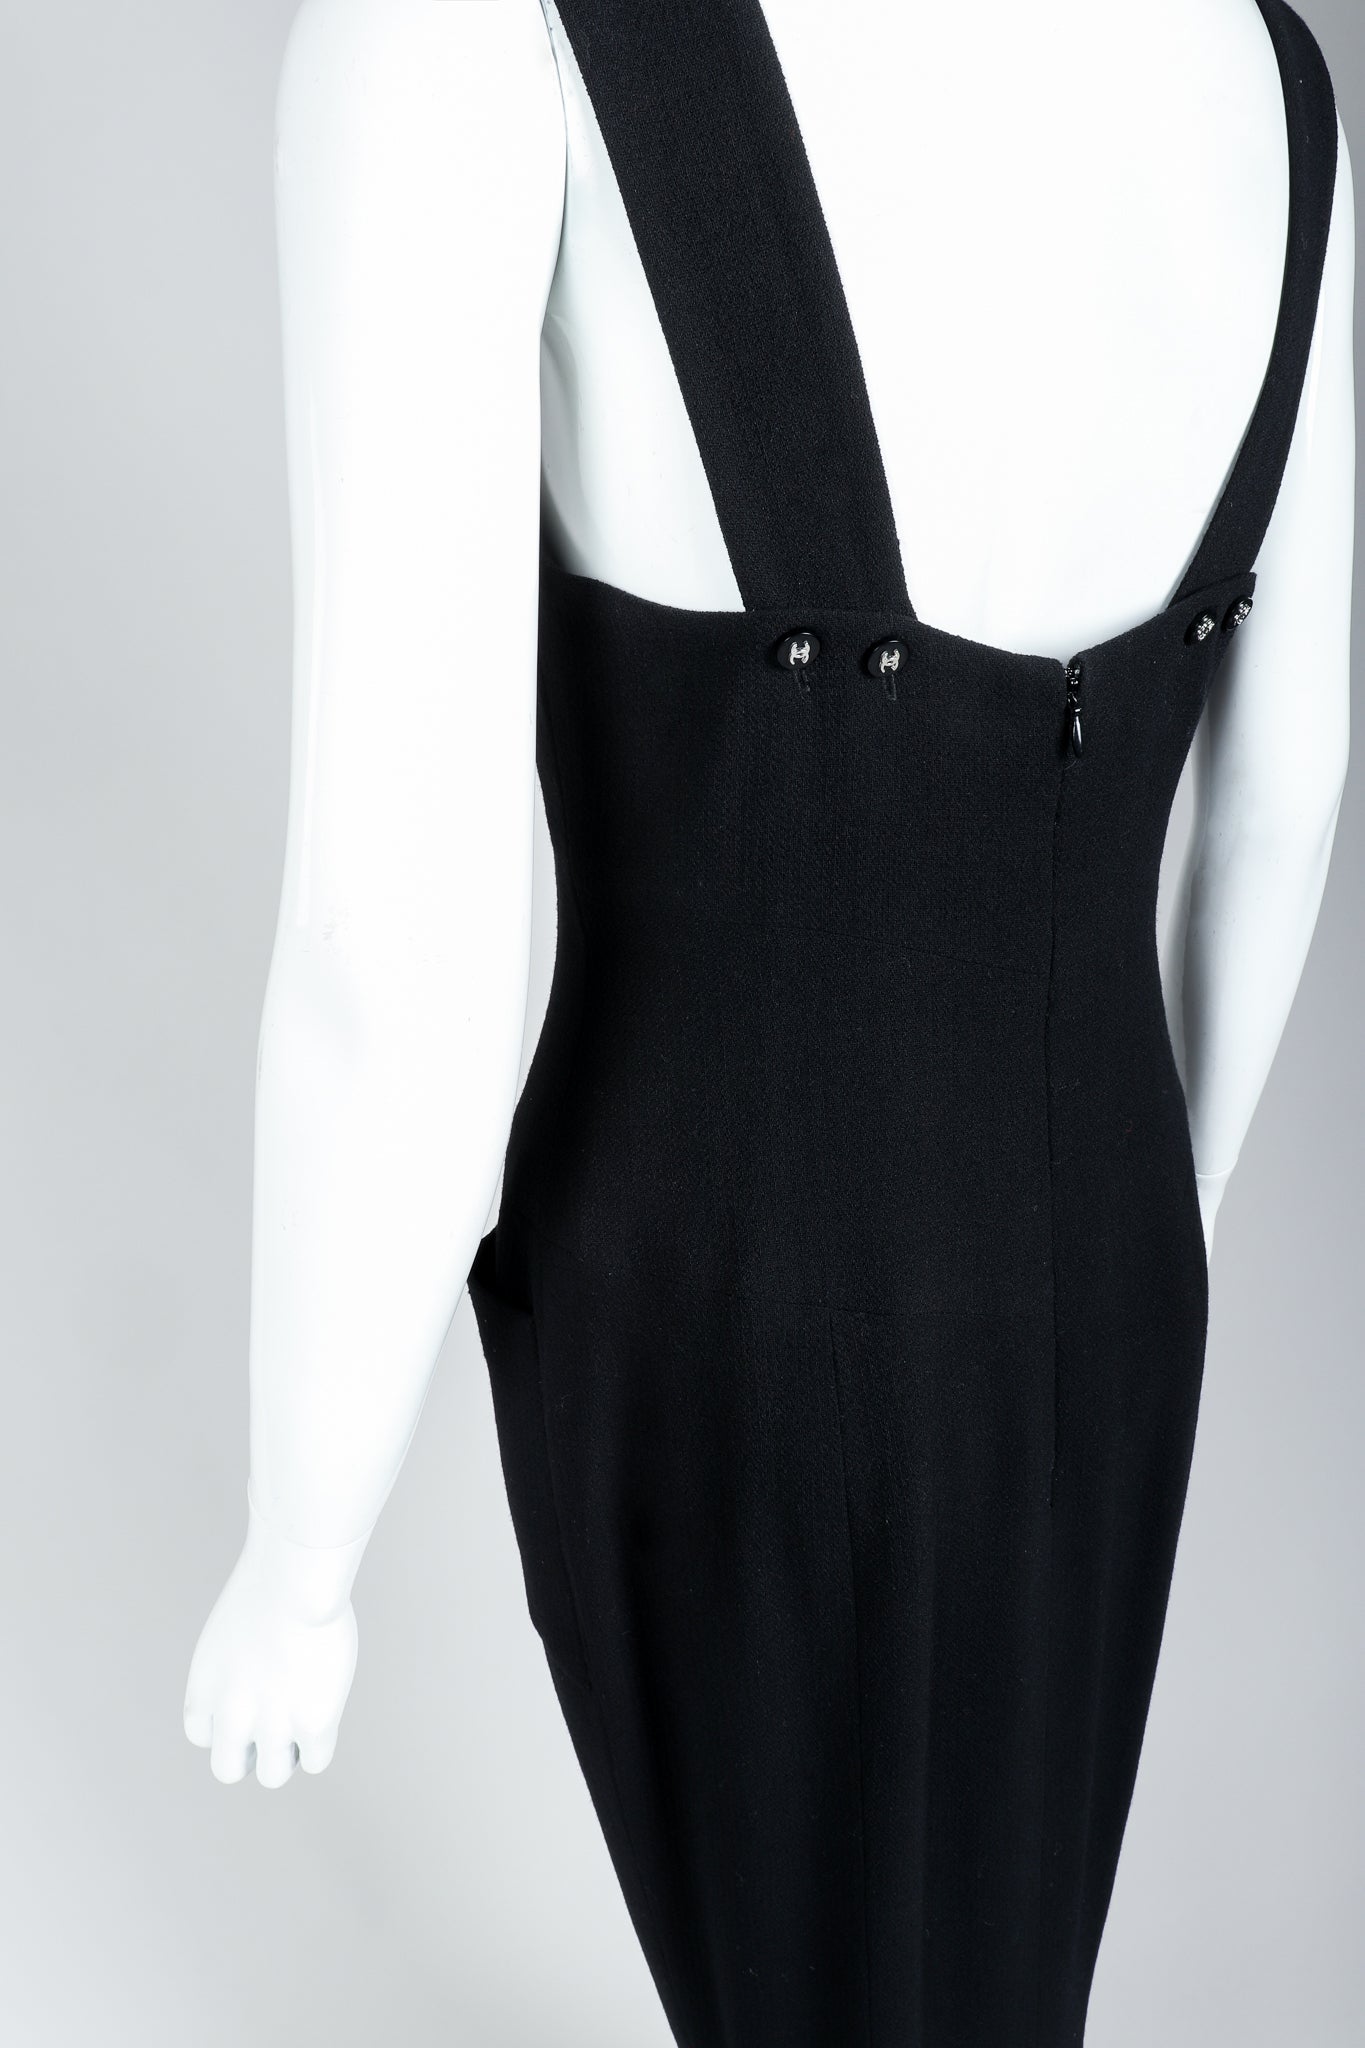 Vintage Chanel Breakfast At Tiffany's Style Black Fishtail Gown on Mannequin, Back Detail